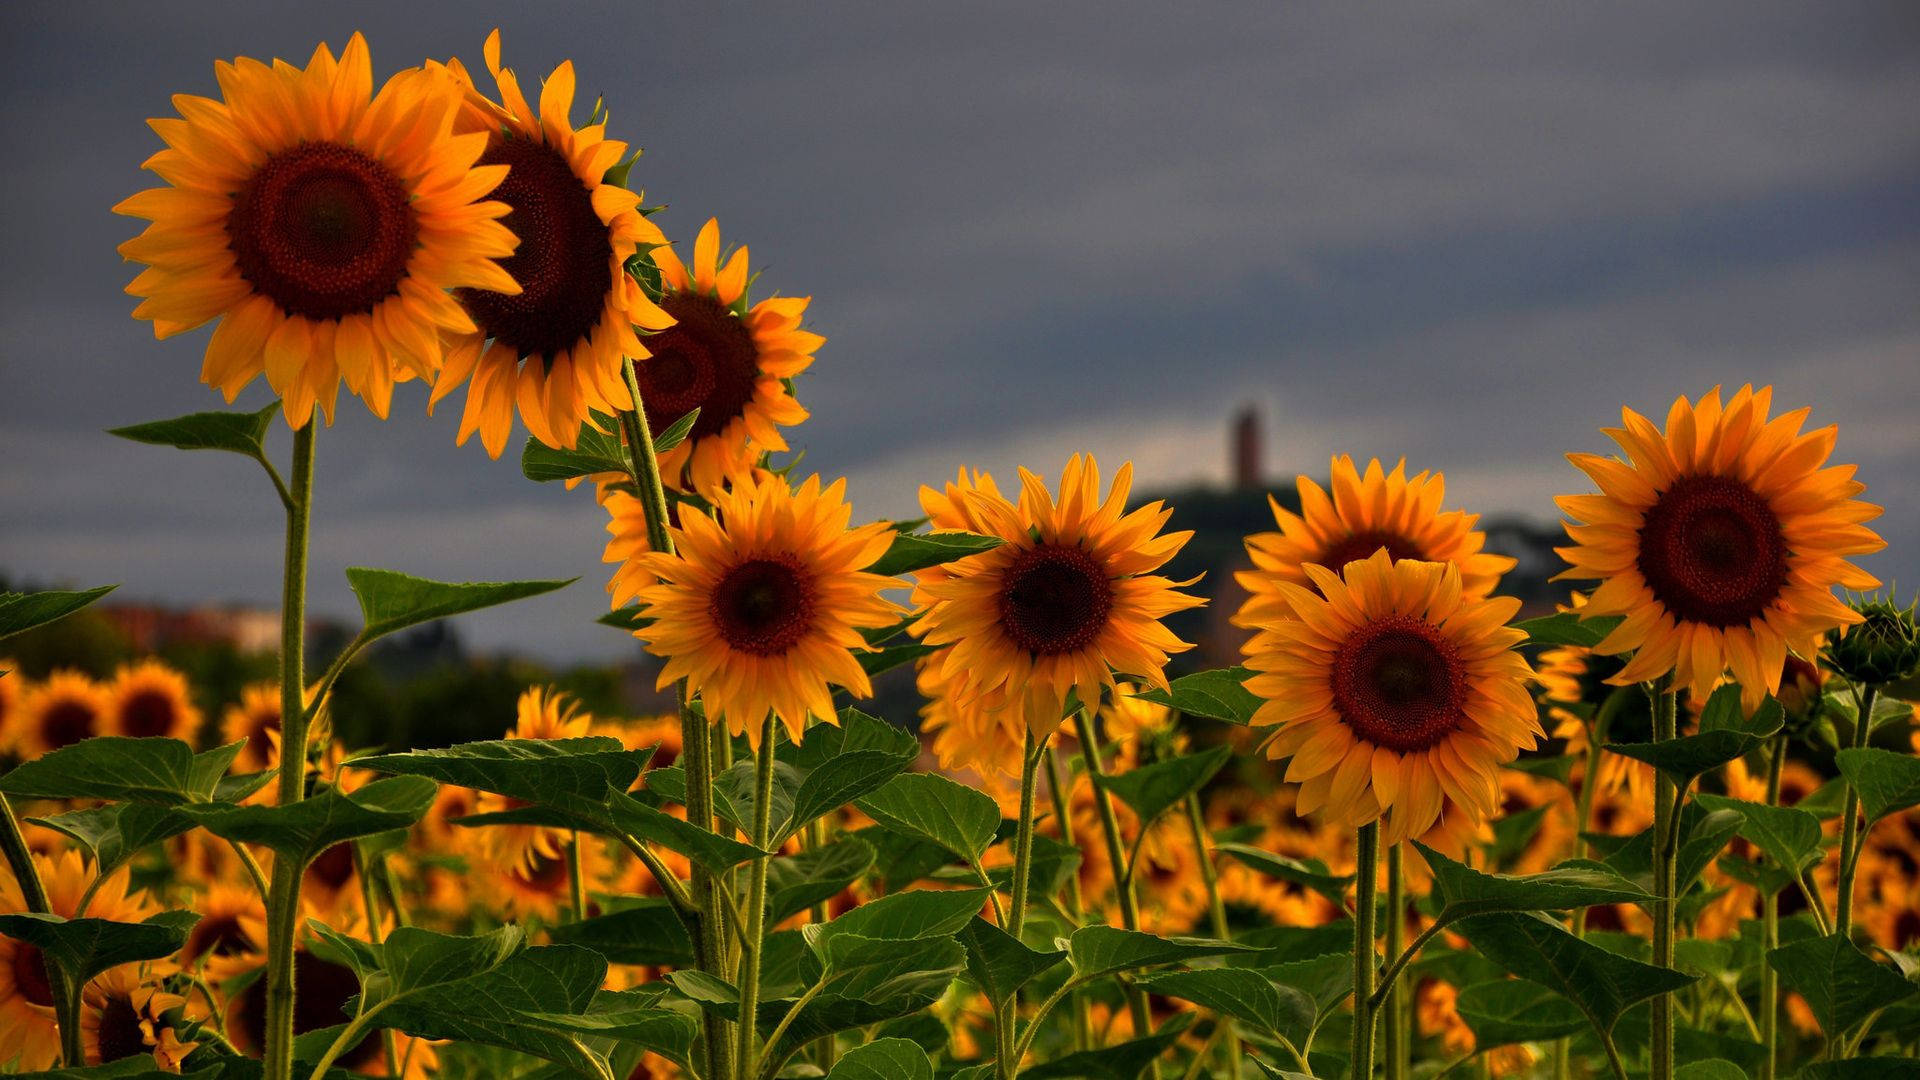 Relax and Enjoy the View of a Stunning Sunflower Field Wallpaper